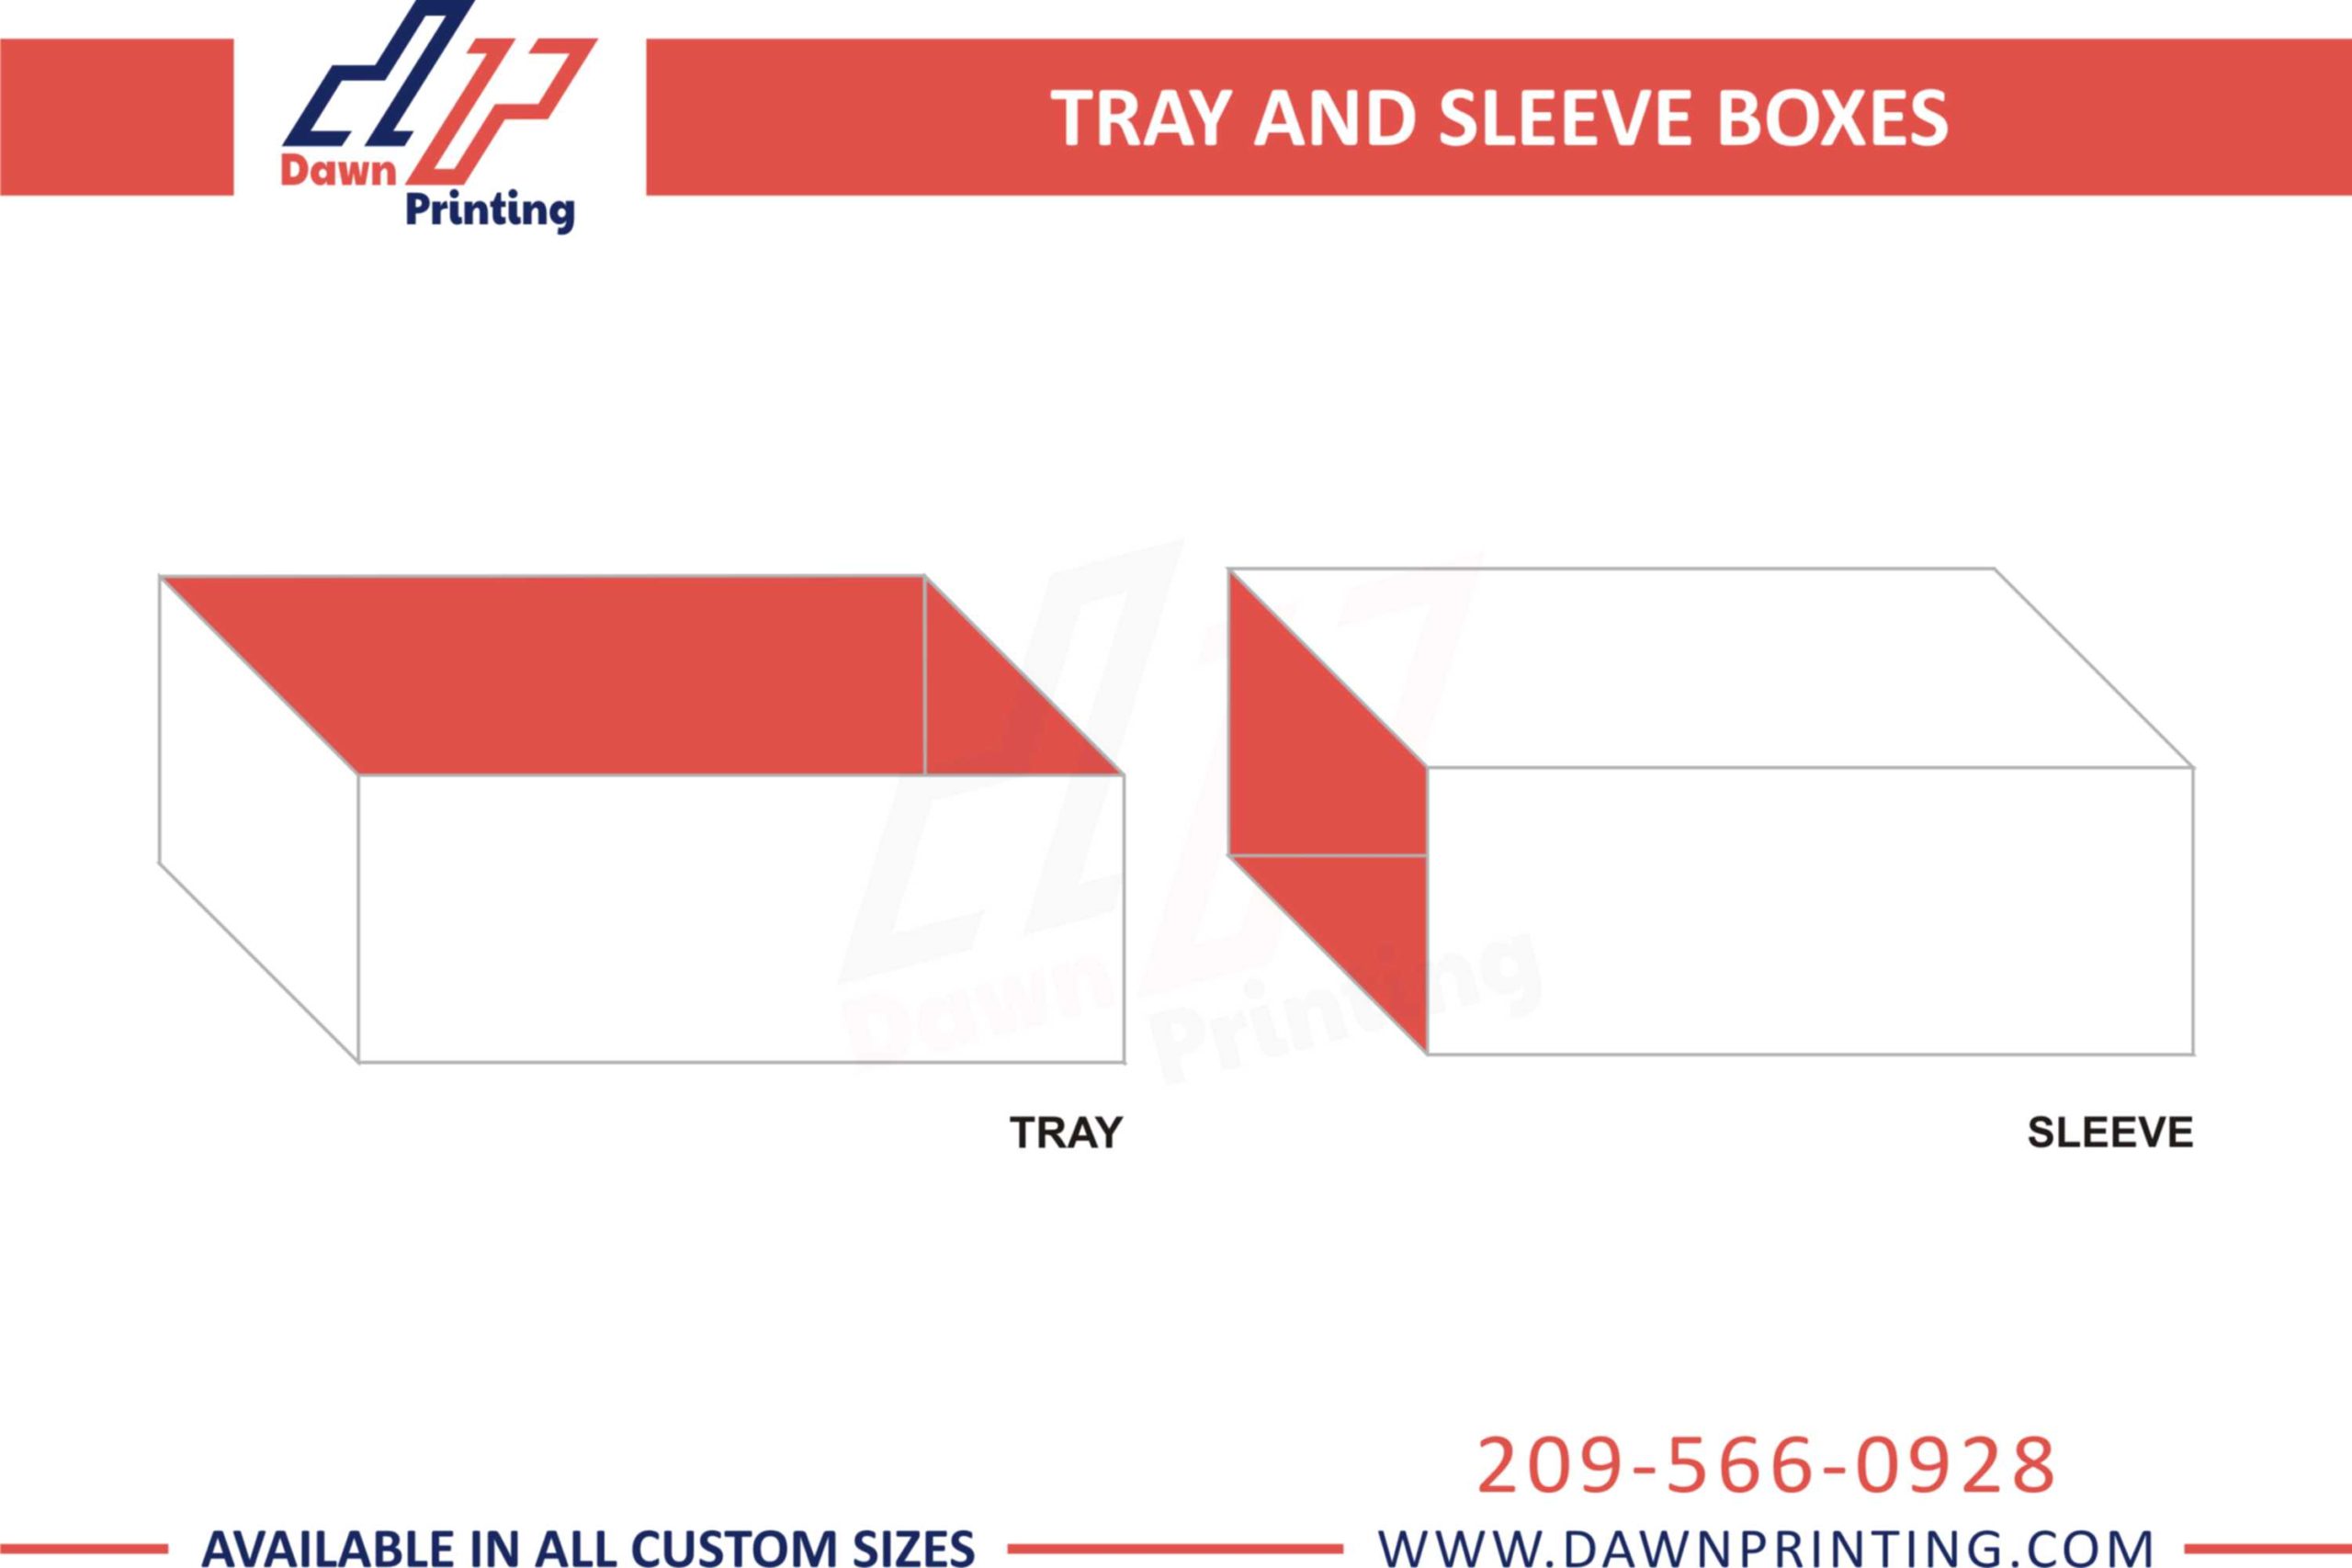 Custom Tray and Sleeve Packaging Boxes - Dawn Printing